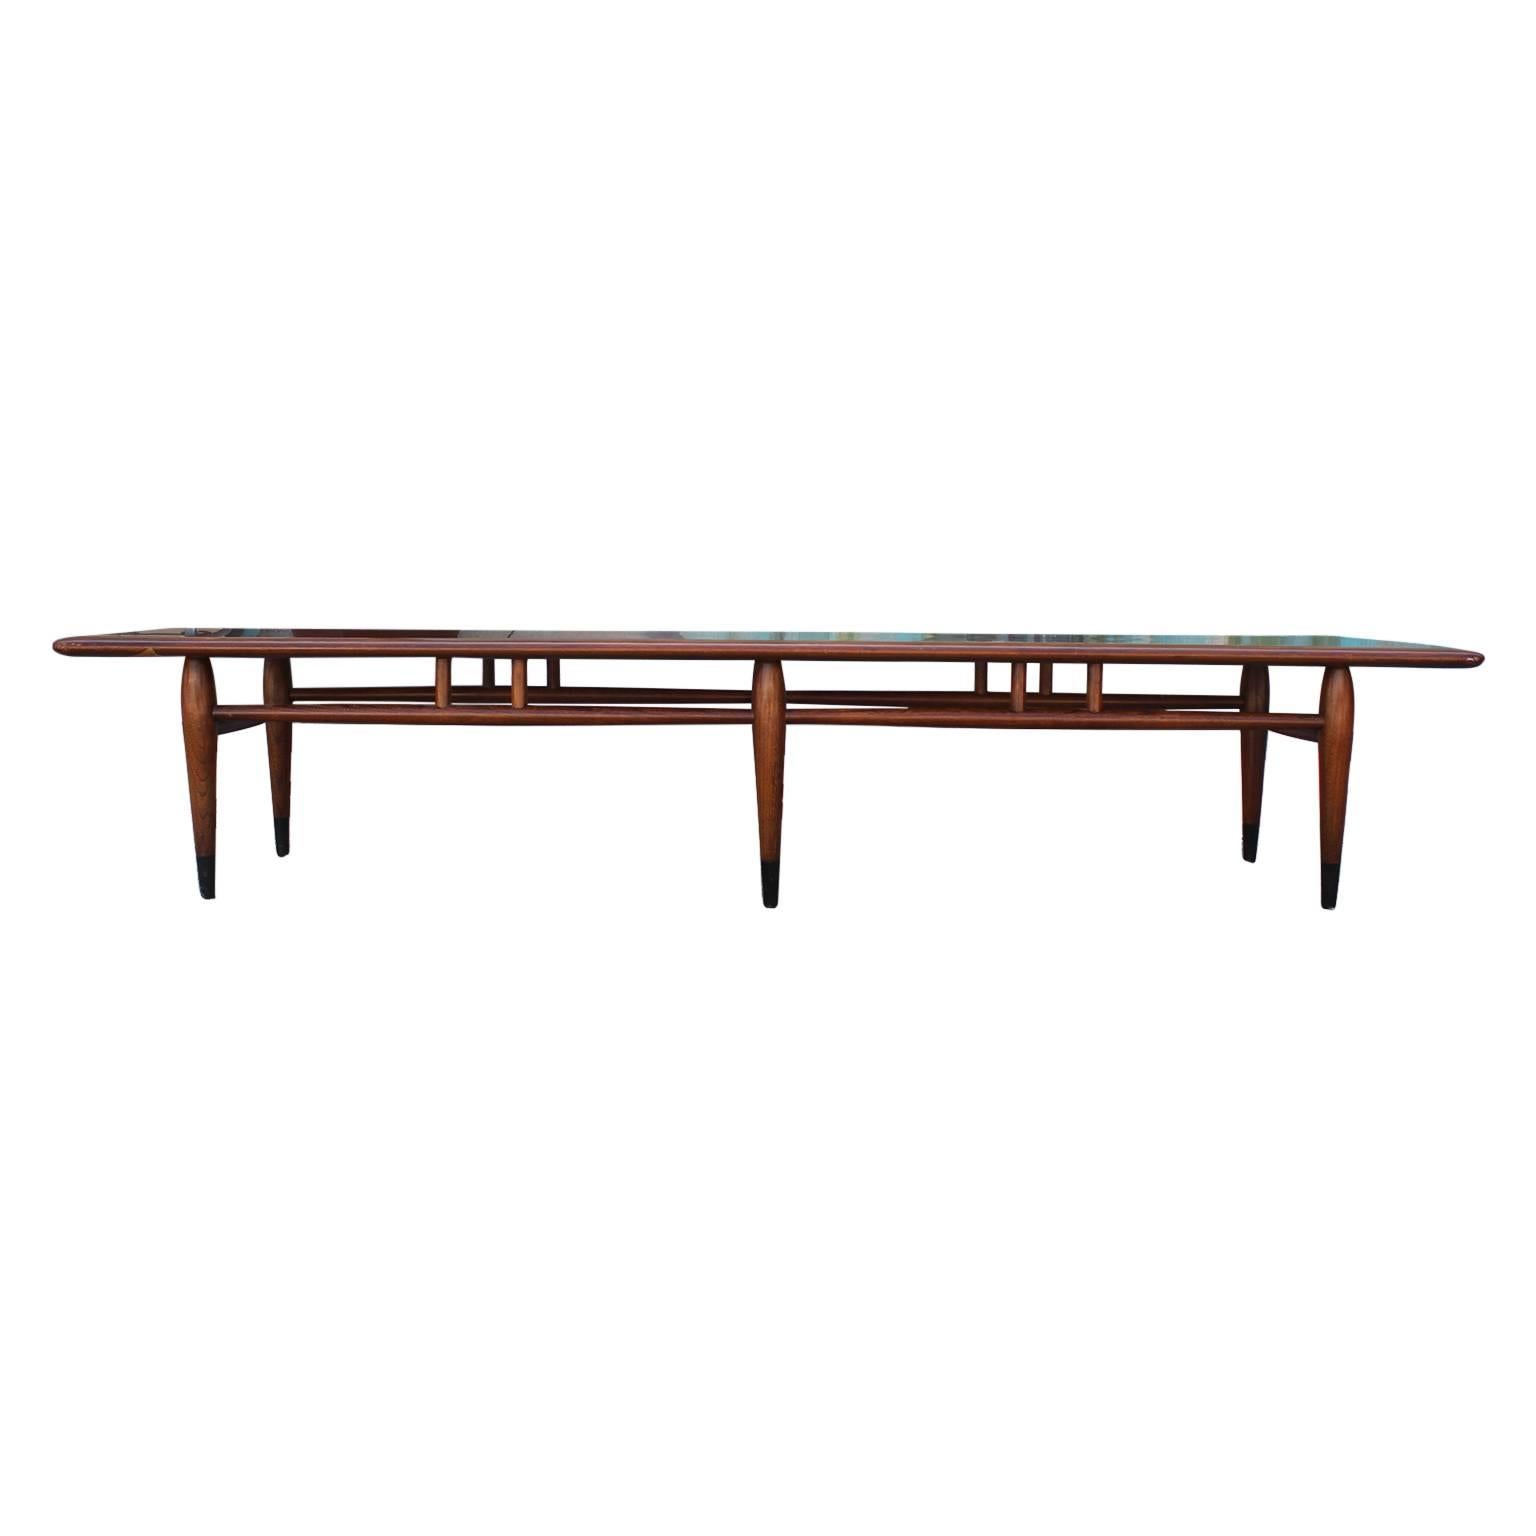 Classic walnut Lane coffee table with two-toned dovetailed detailing. Burn mark shown in pictures.